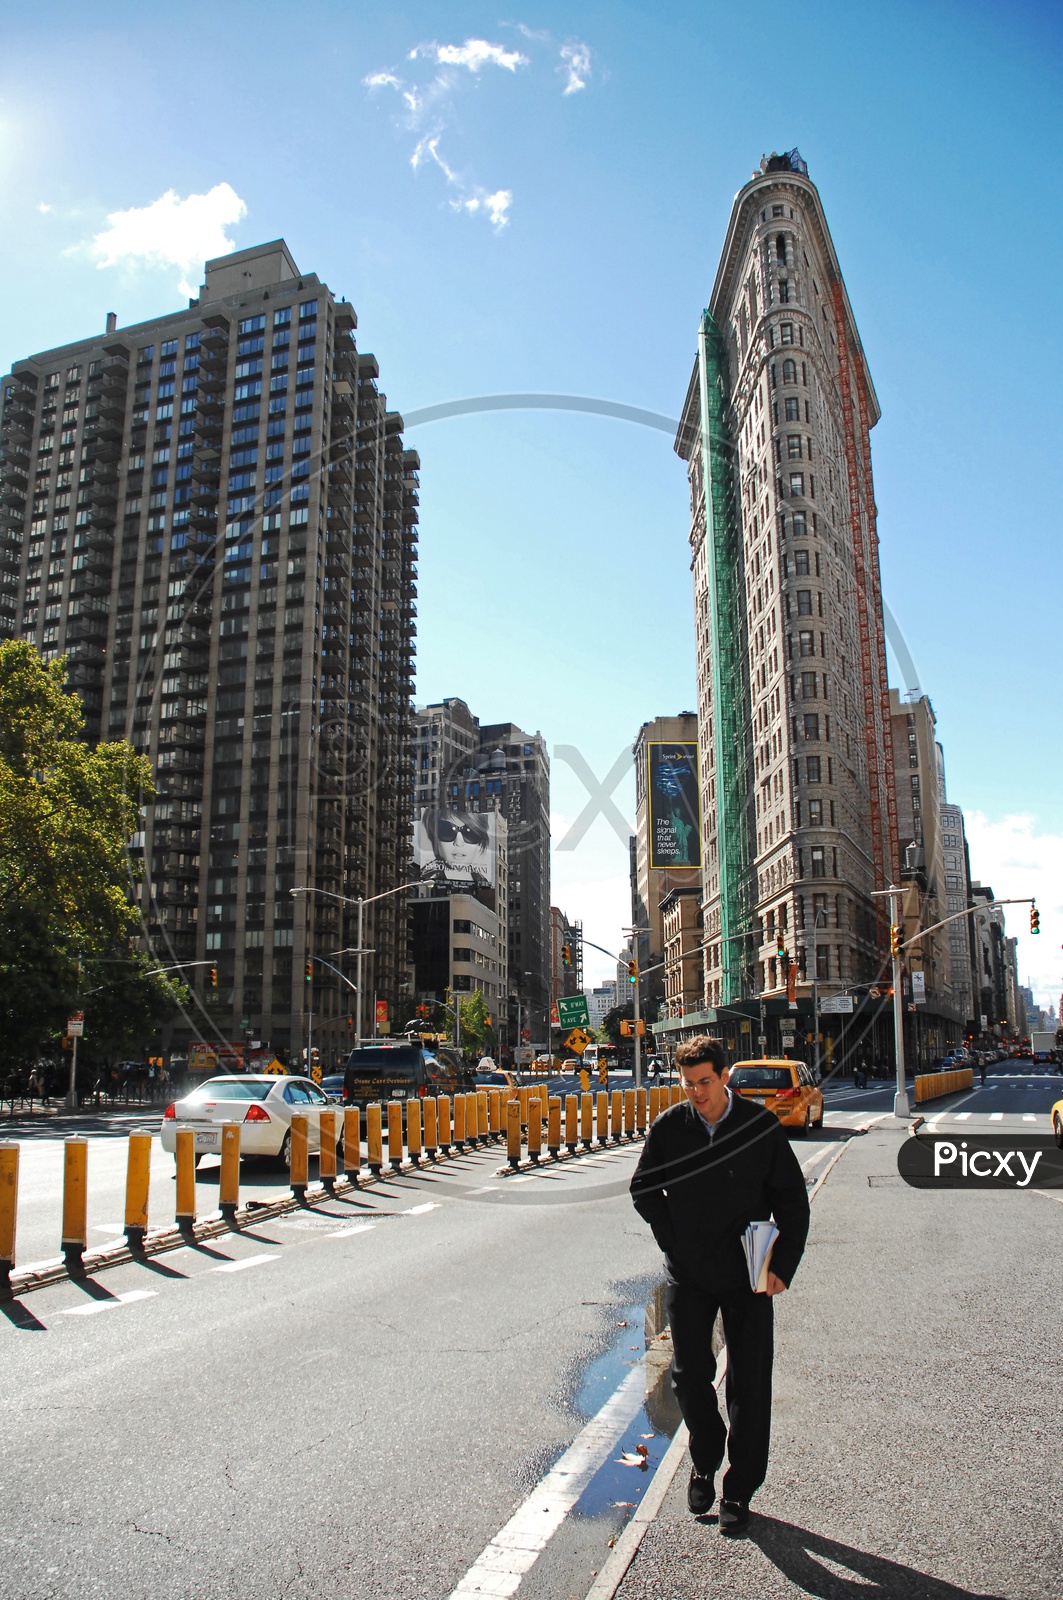 A man walking on the road in New York